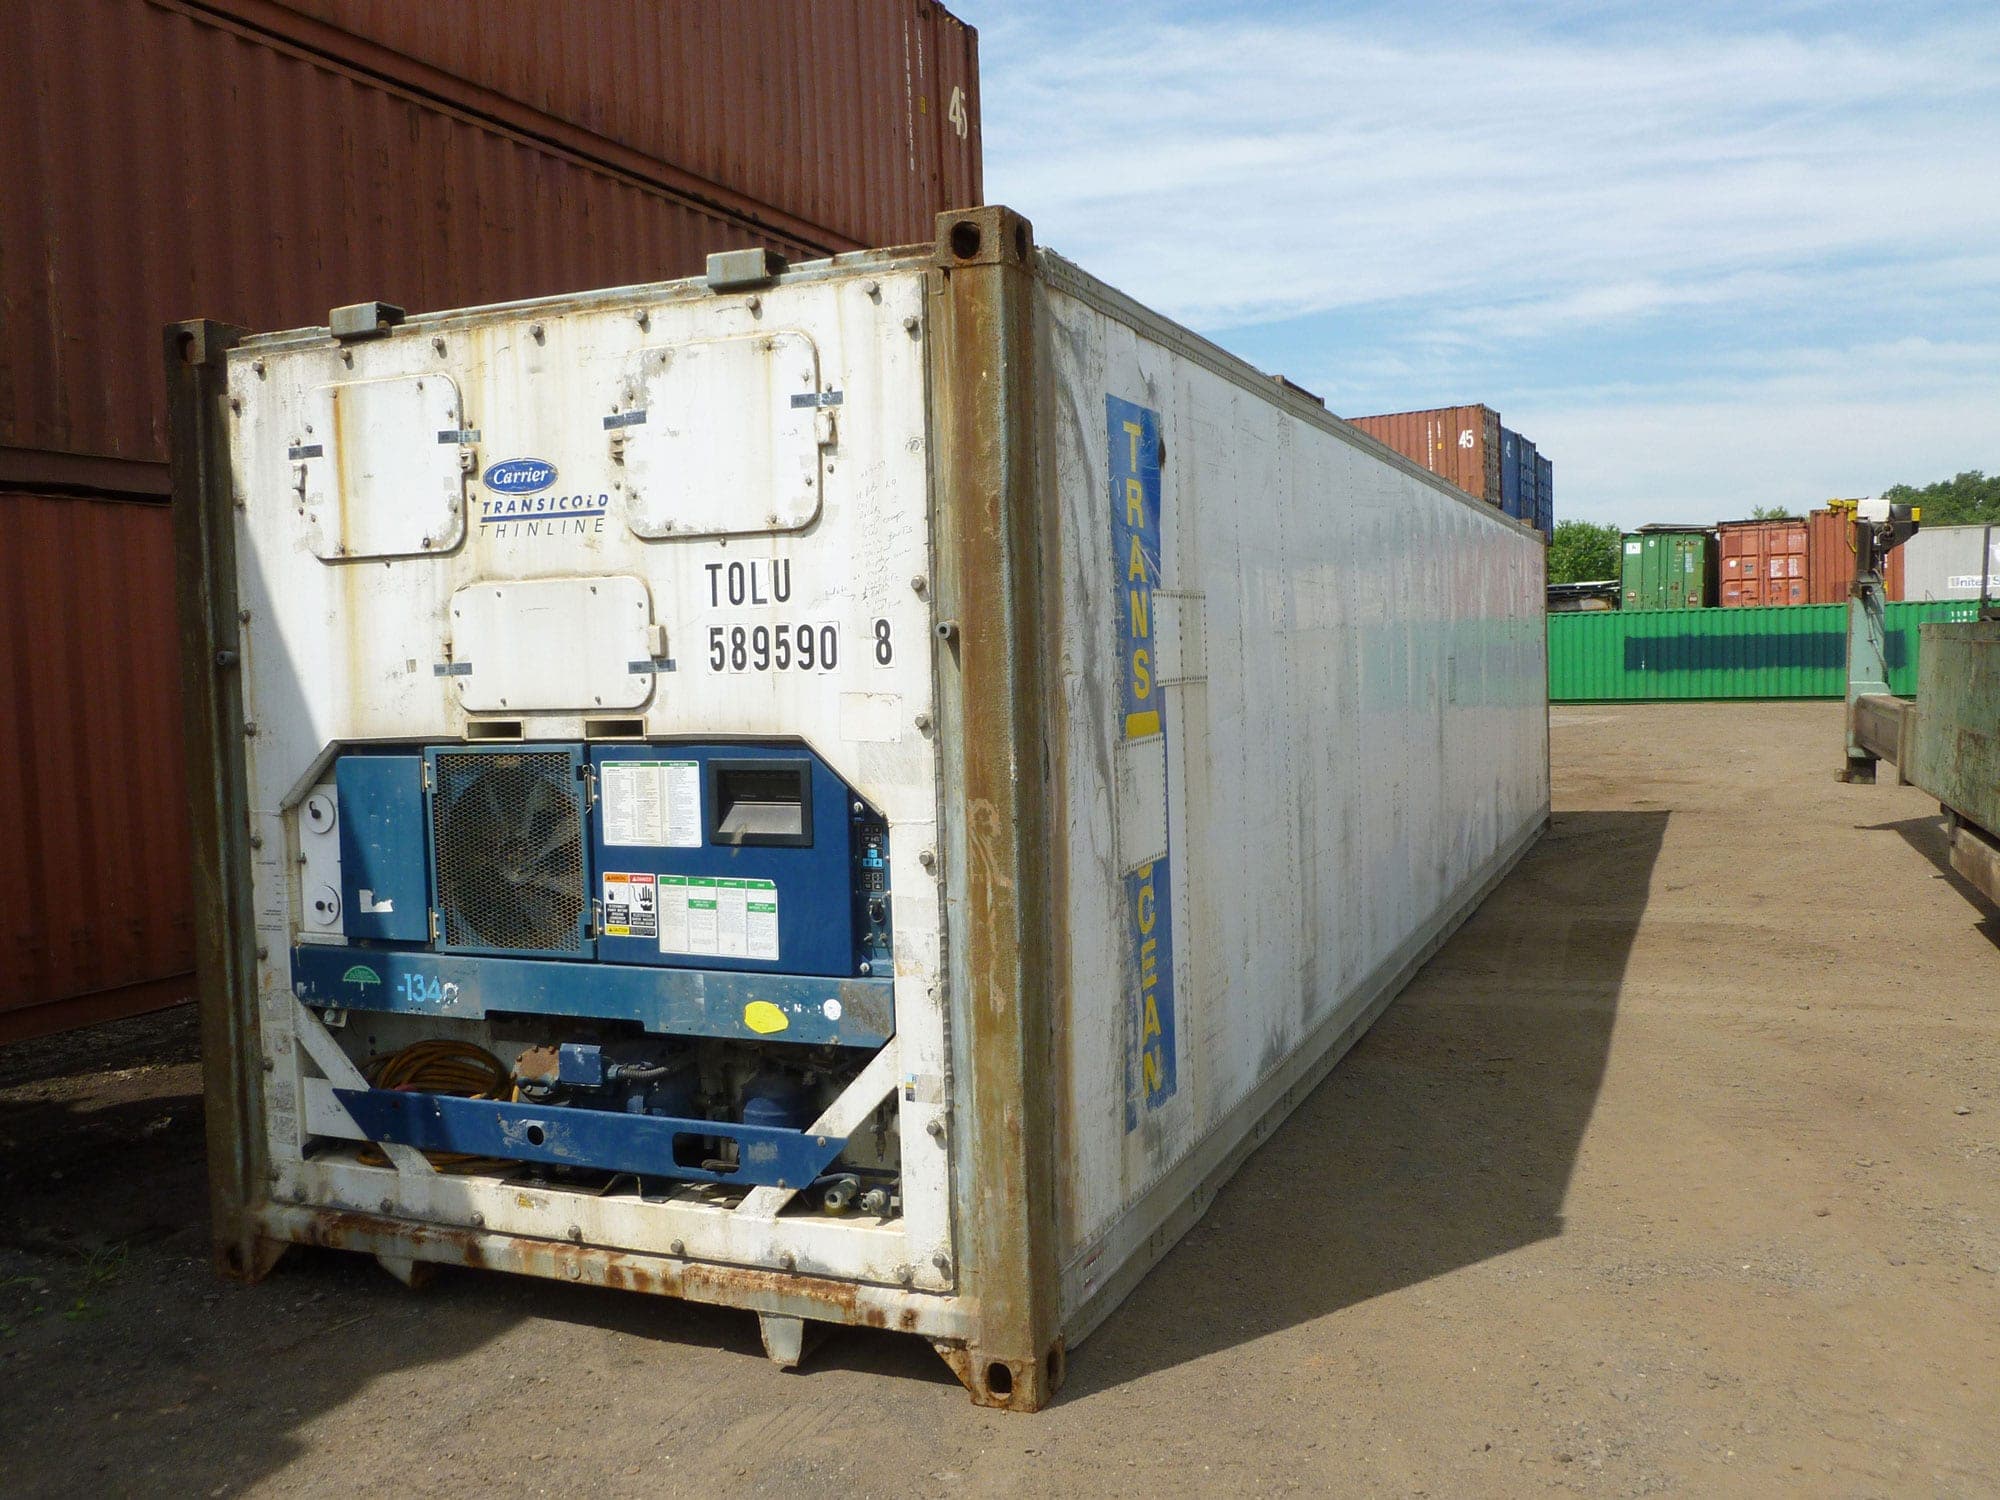 TRS stocks new and used 40ft refrigeration containers